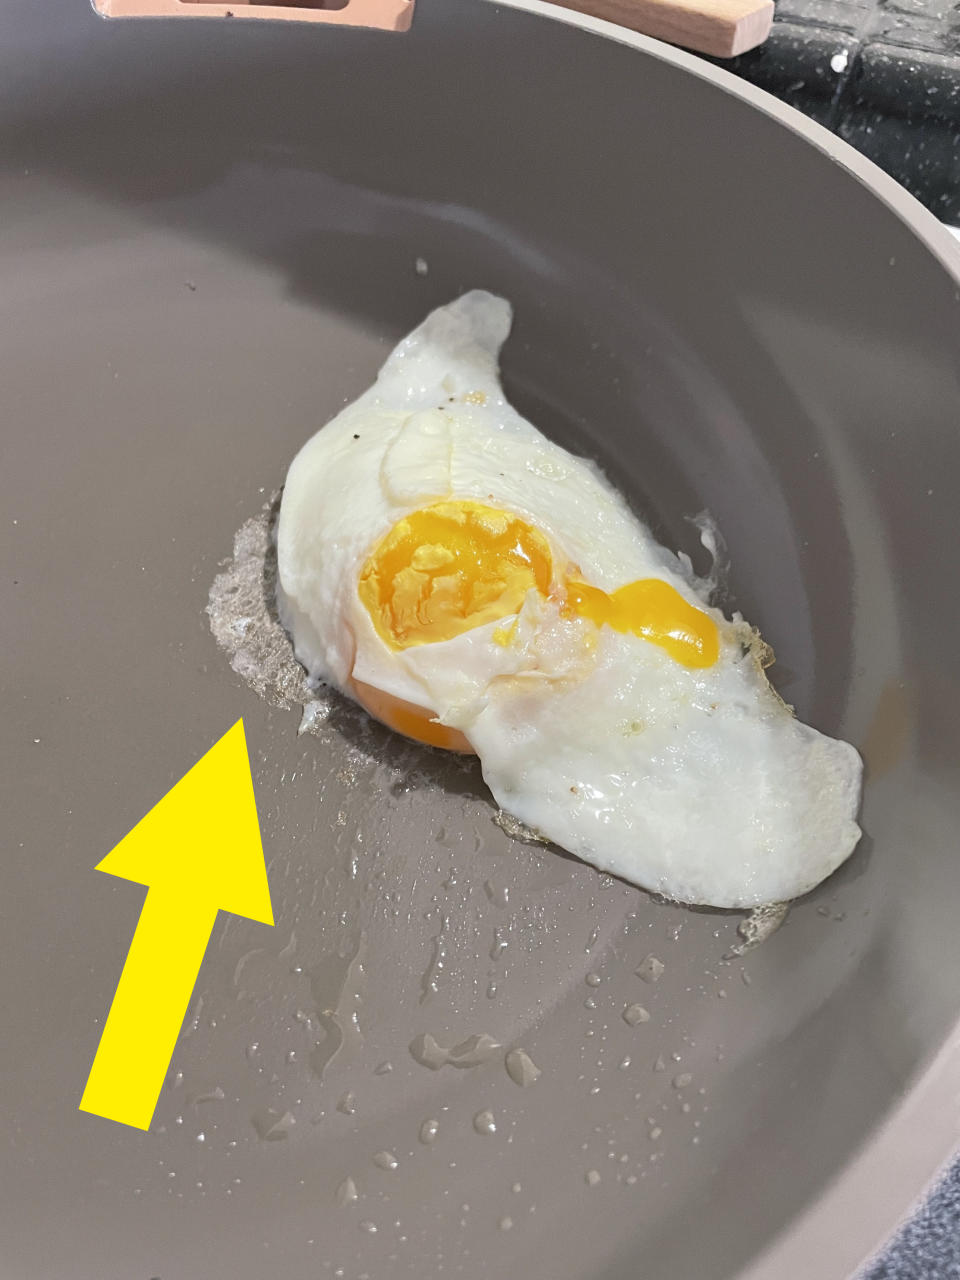 Over-easy egg in the pan with some leaking